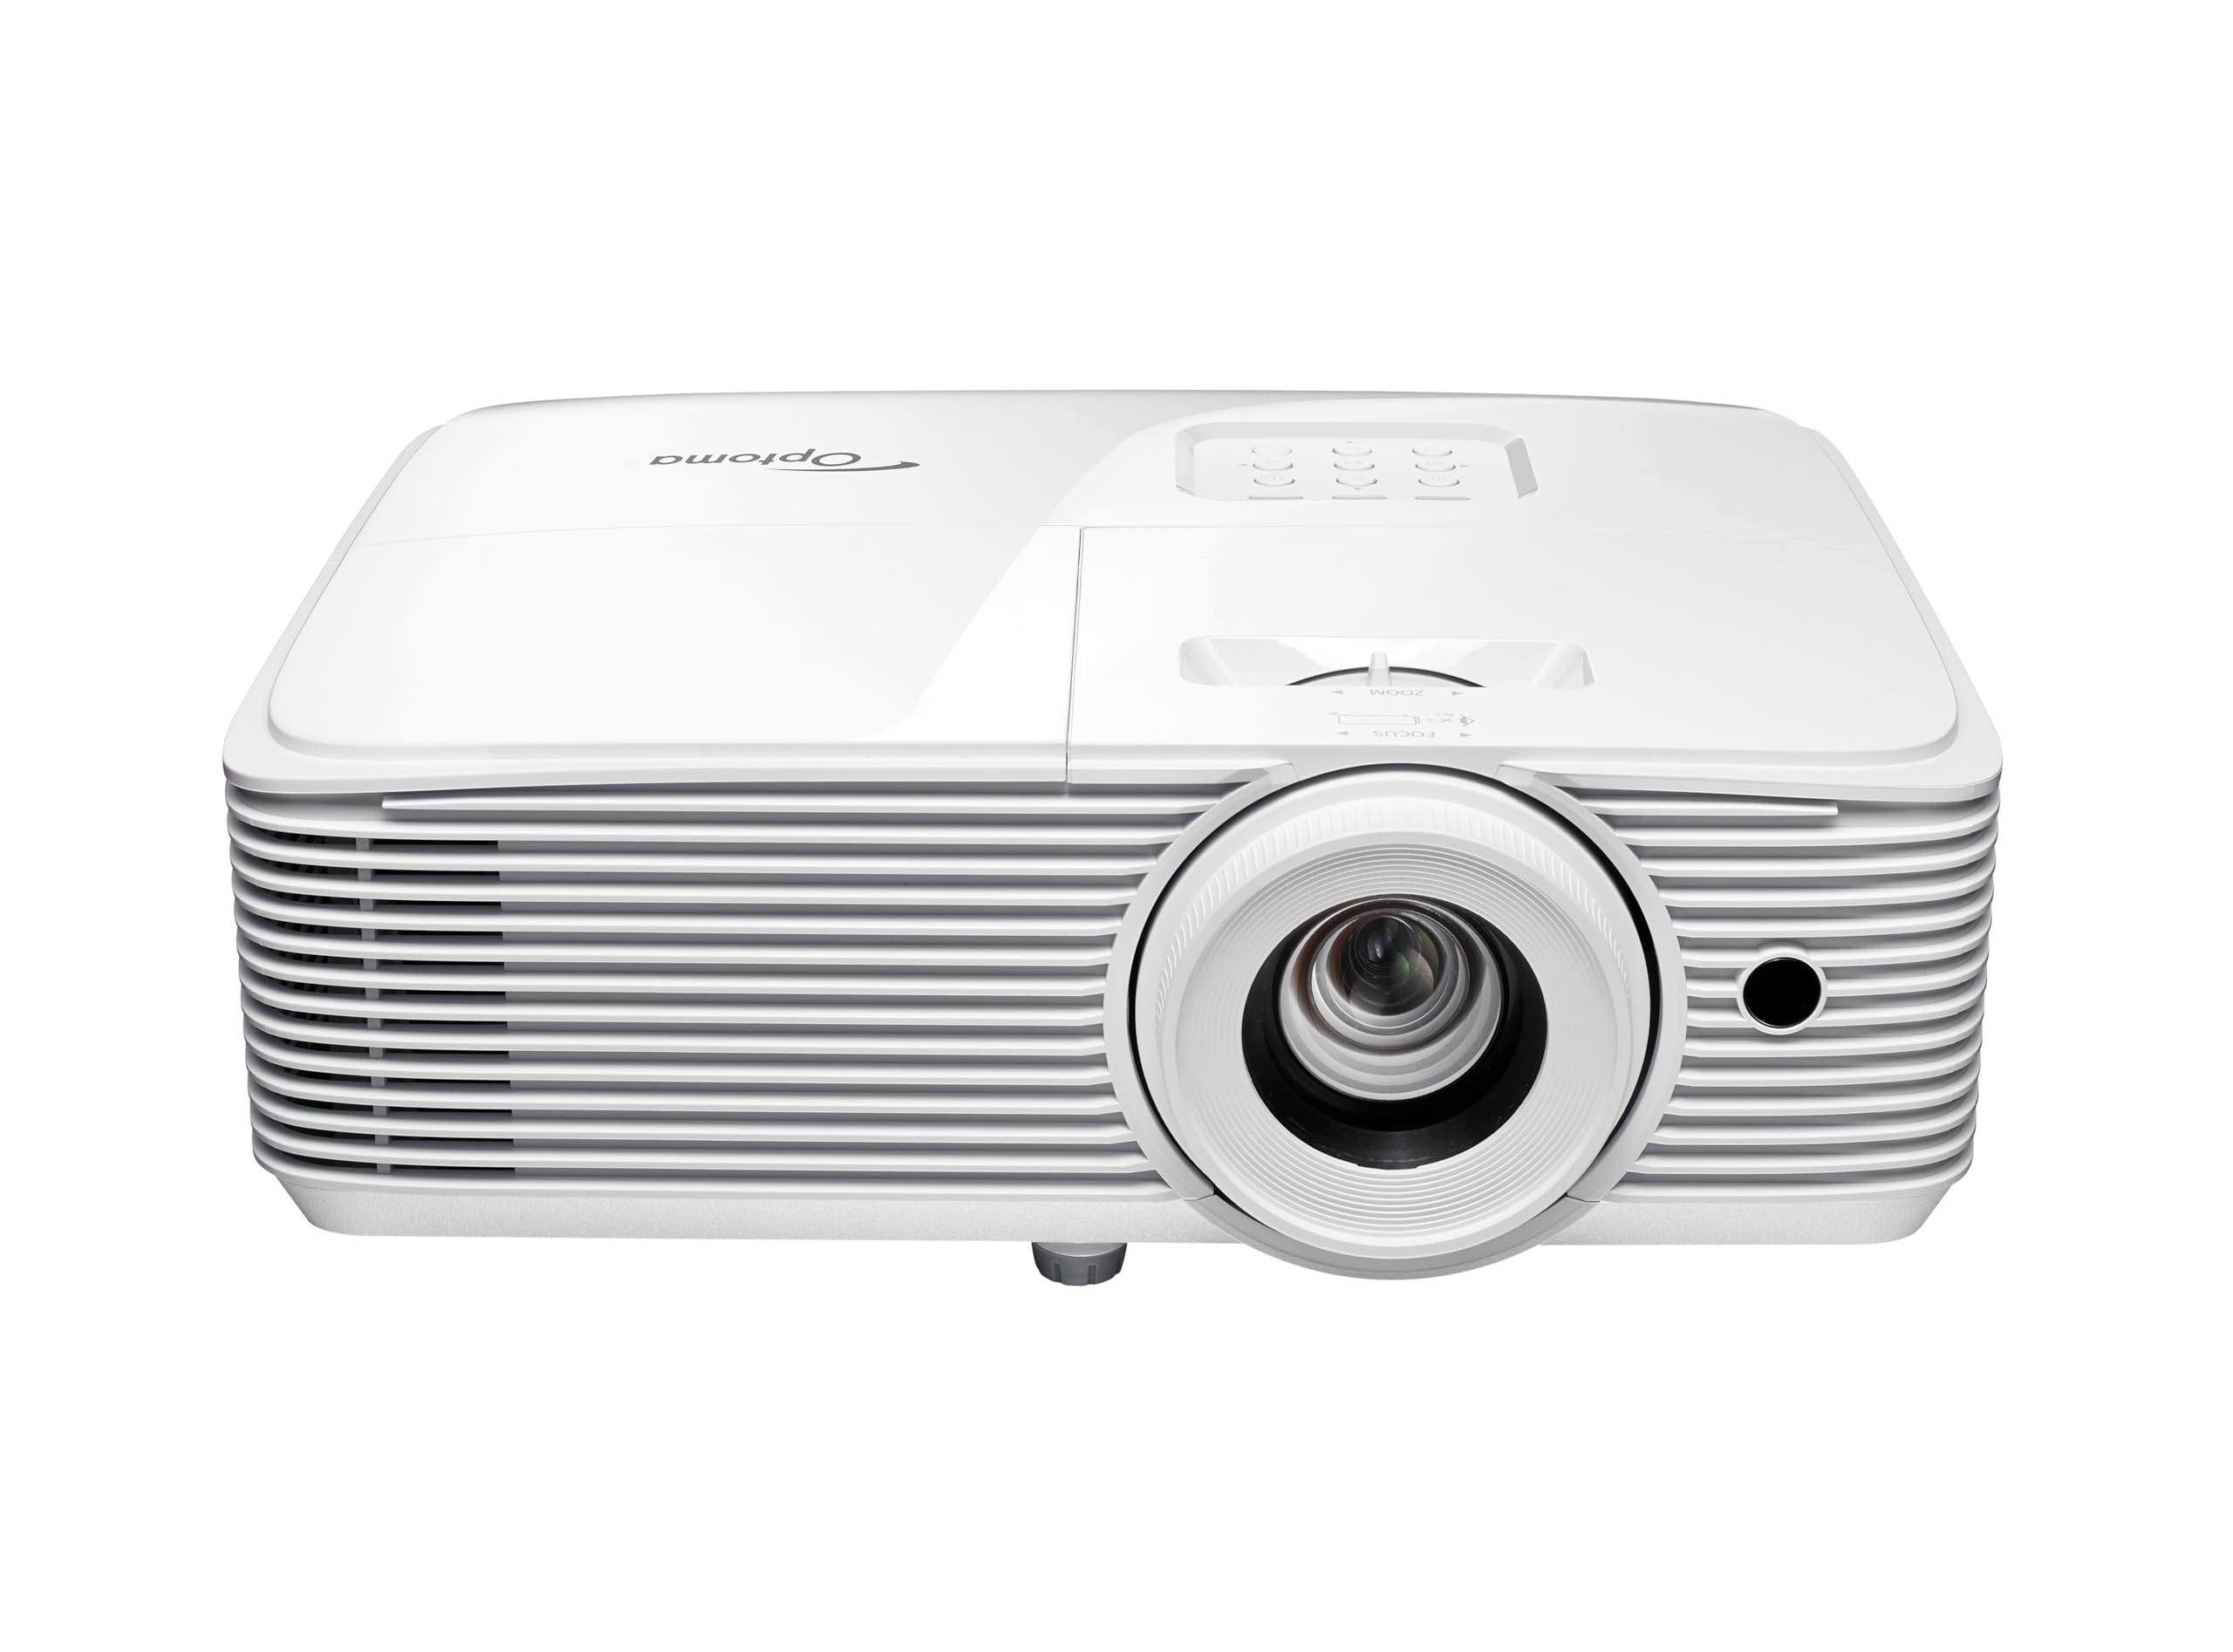 Optoma HD30LV Compact Gaming and Home Theater Projector, 1080p with 4K HDR Input, High Bright 4,500 Lumens for Day and Night Use